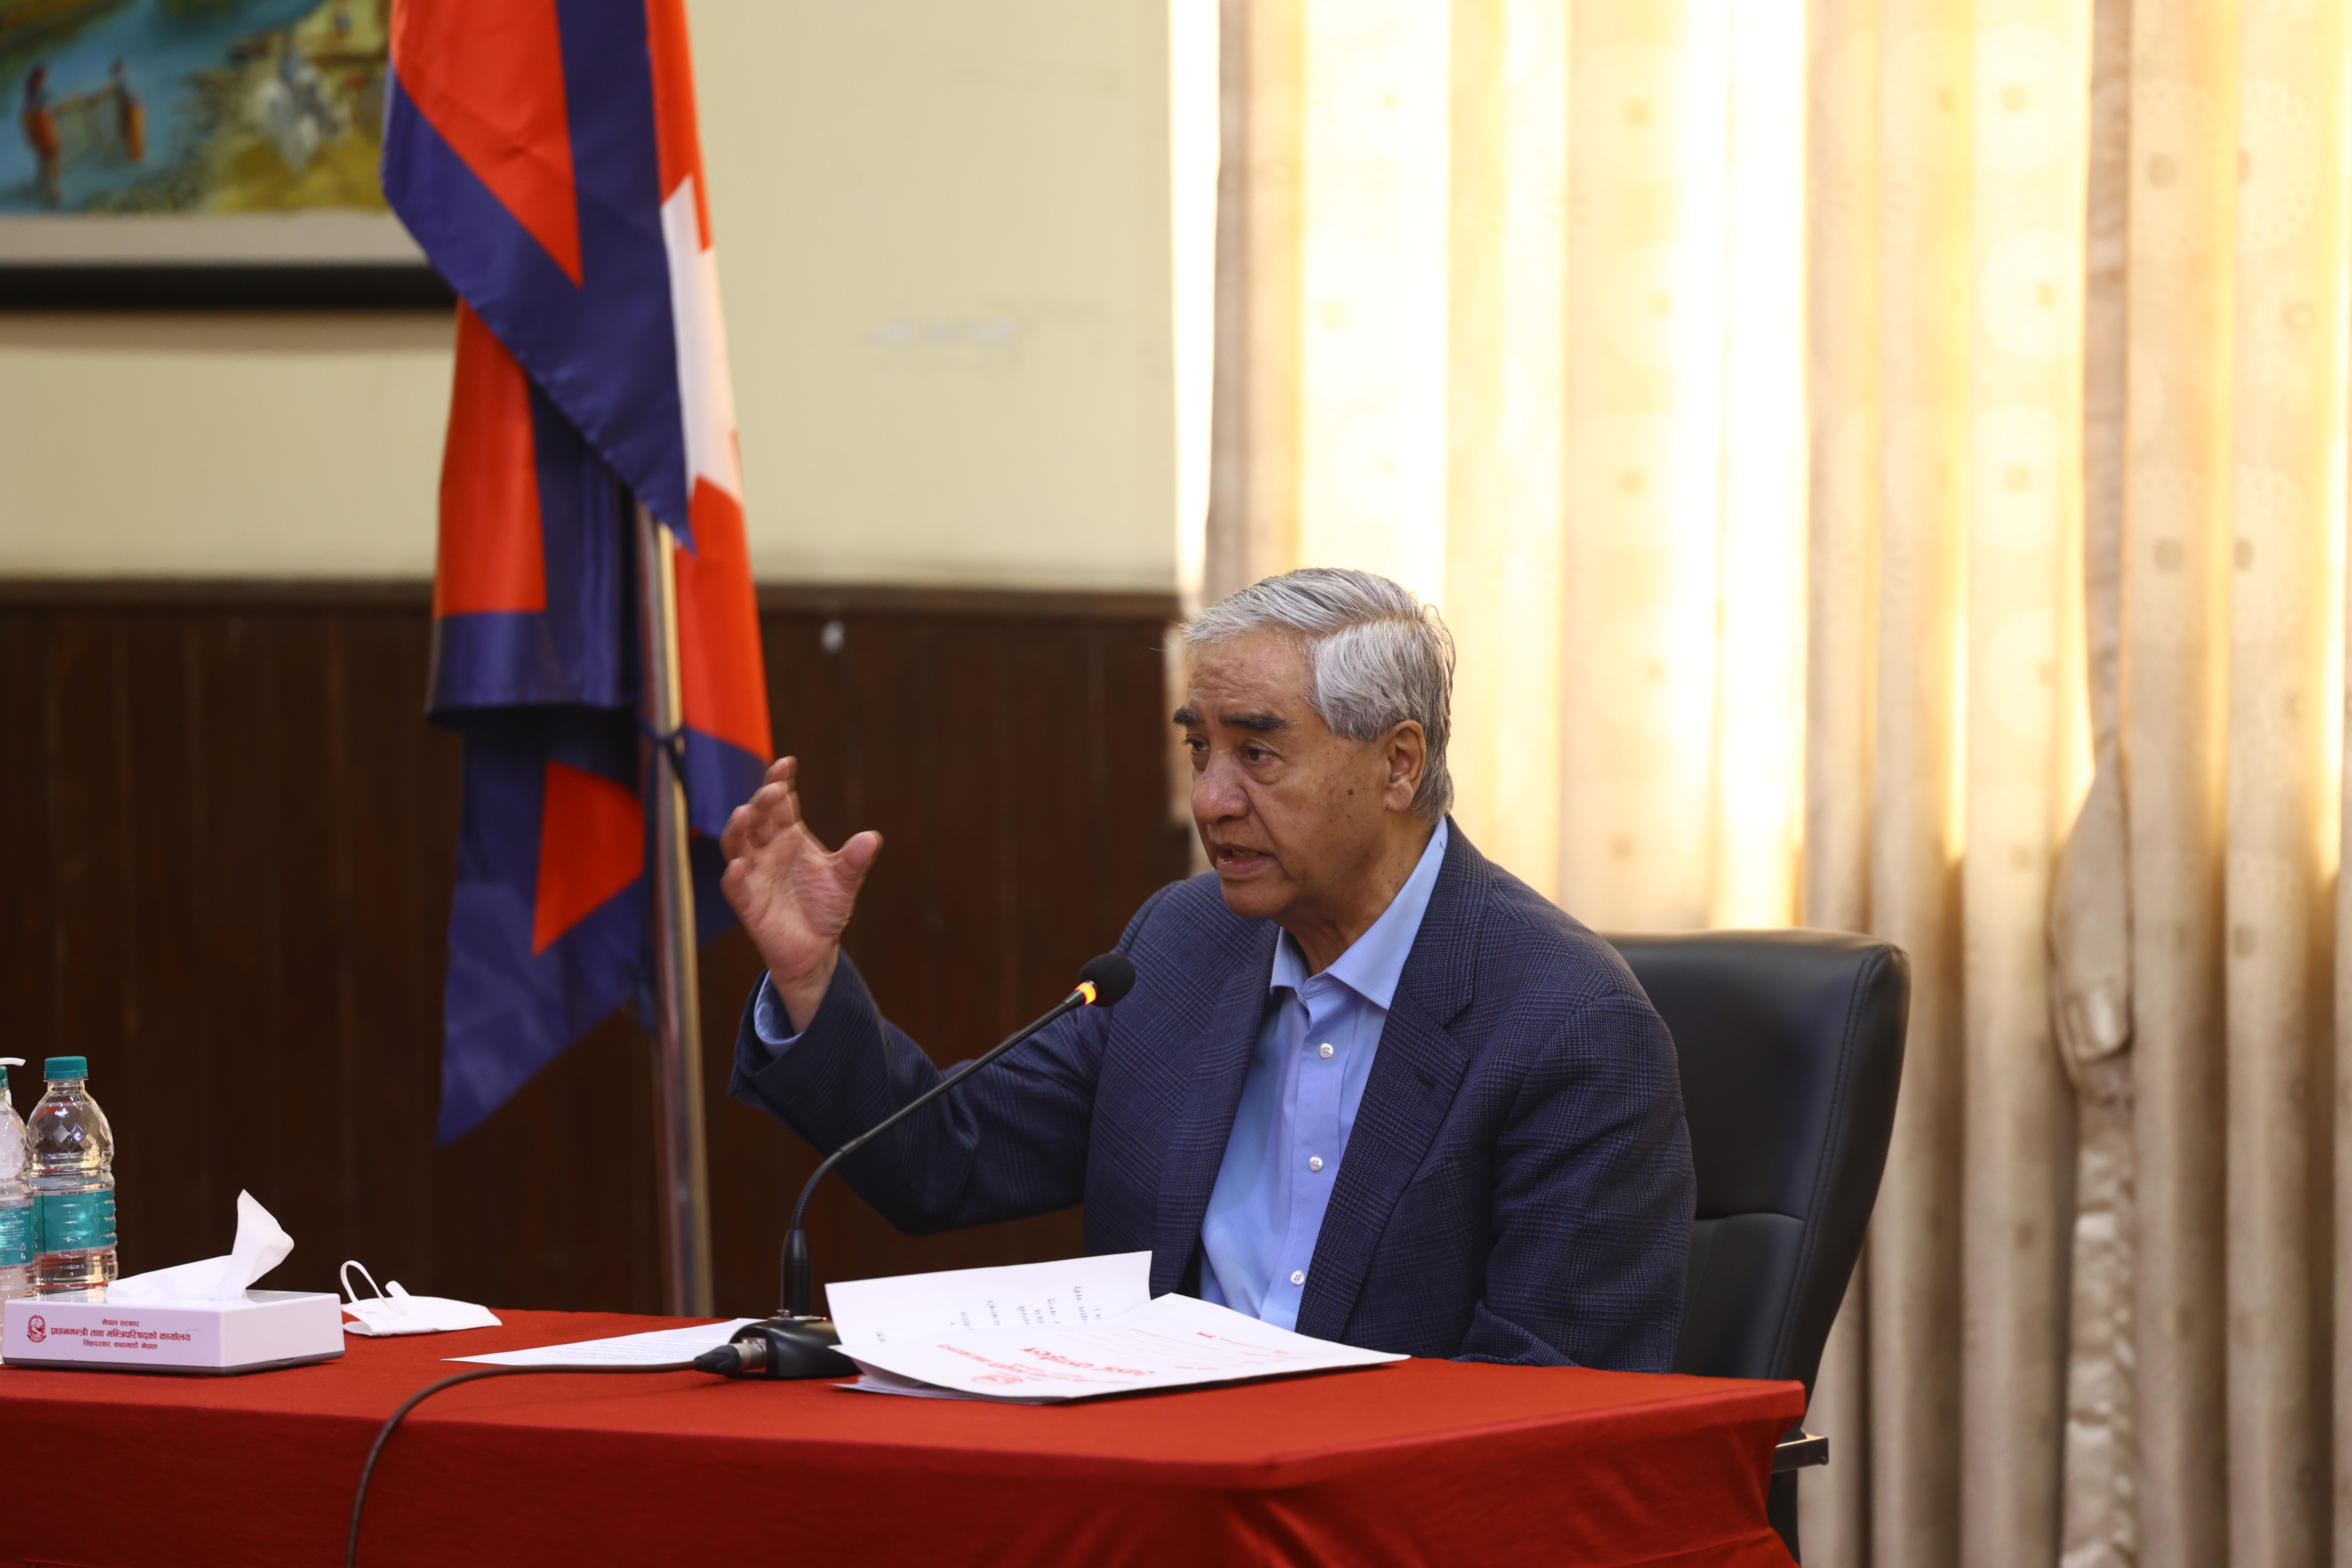 pm-deuba-instructs-to-work-to-reduce-trade-deficit